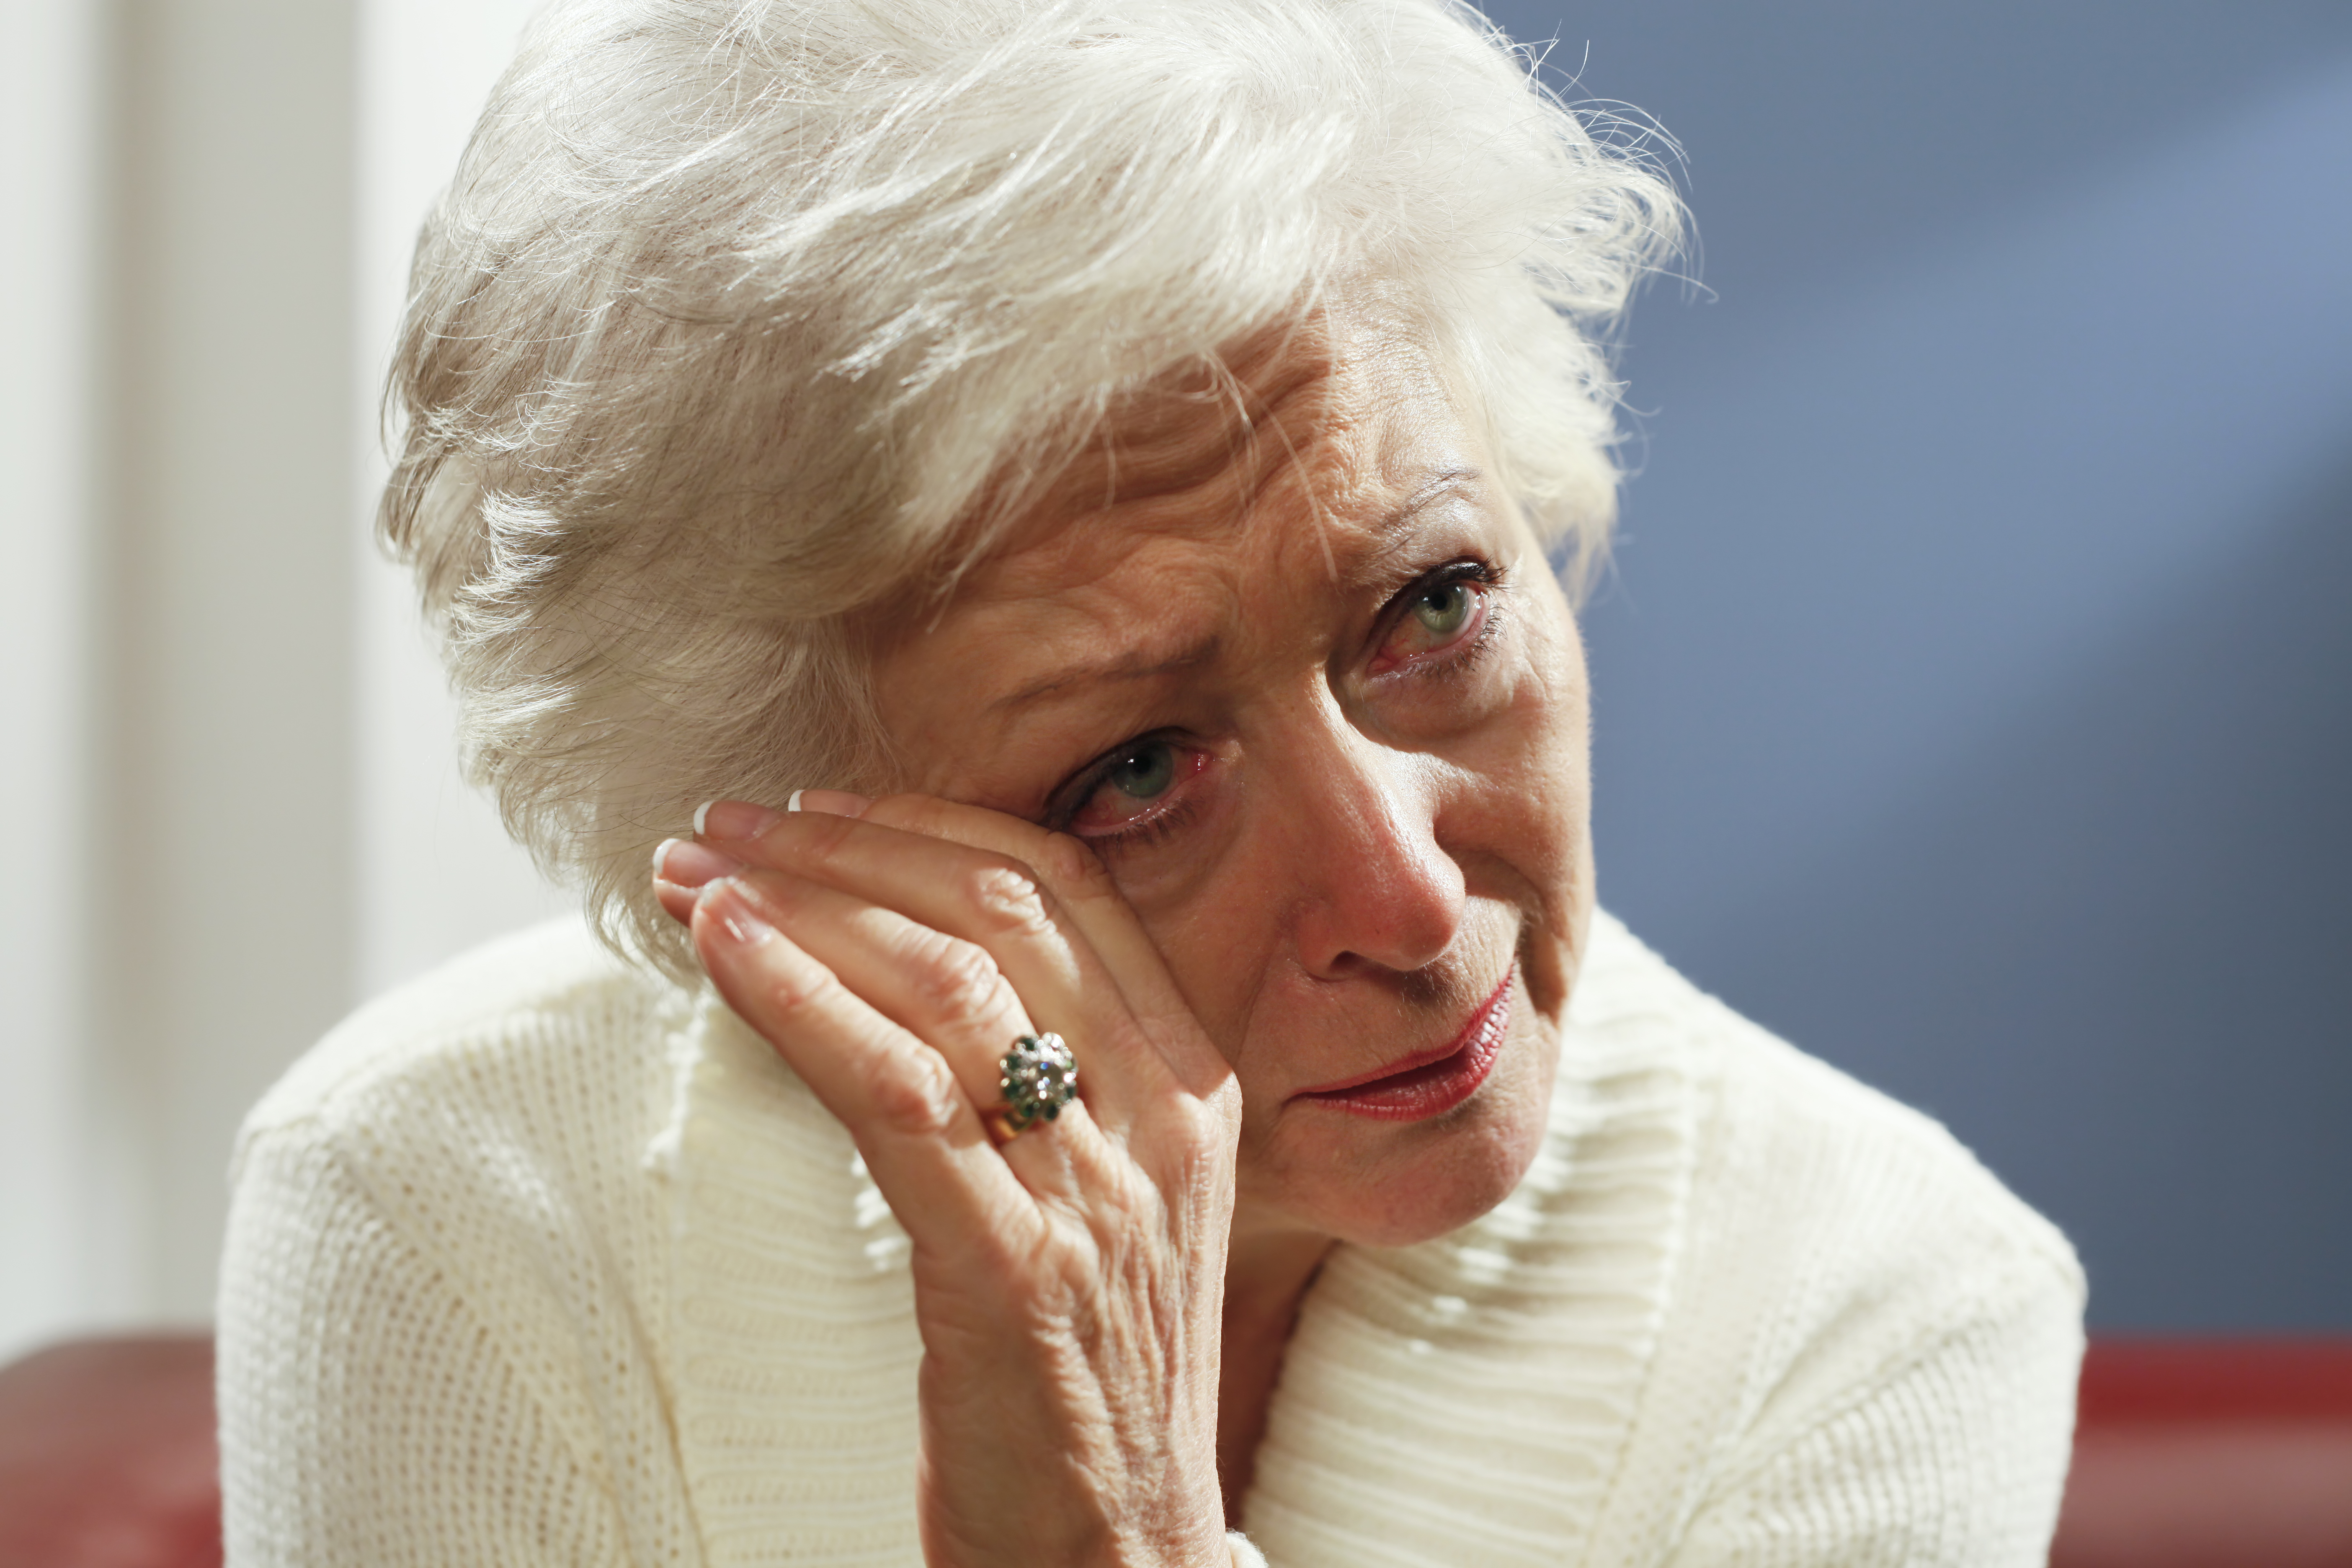 Senior woman crying | Source: Getty Images